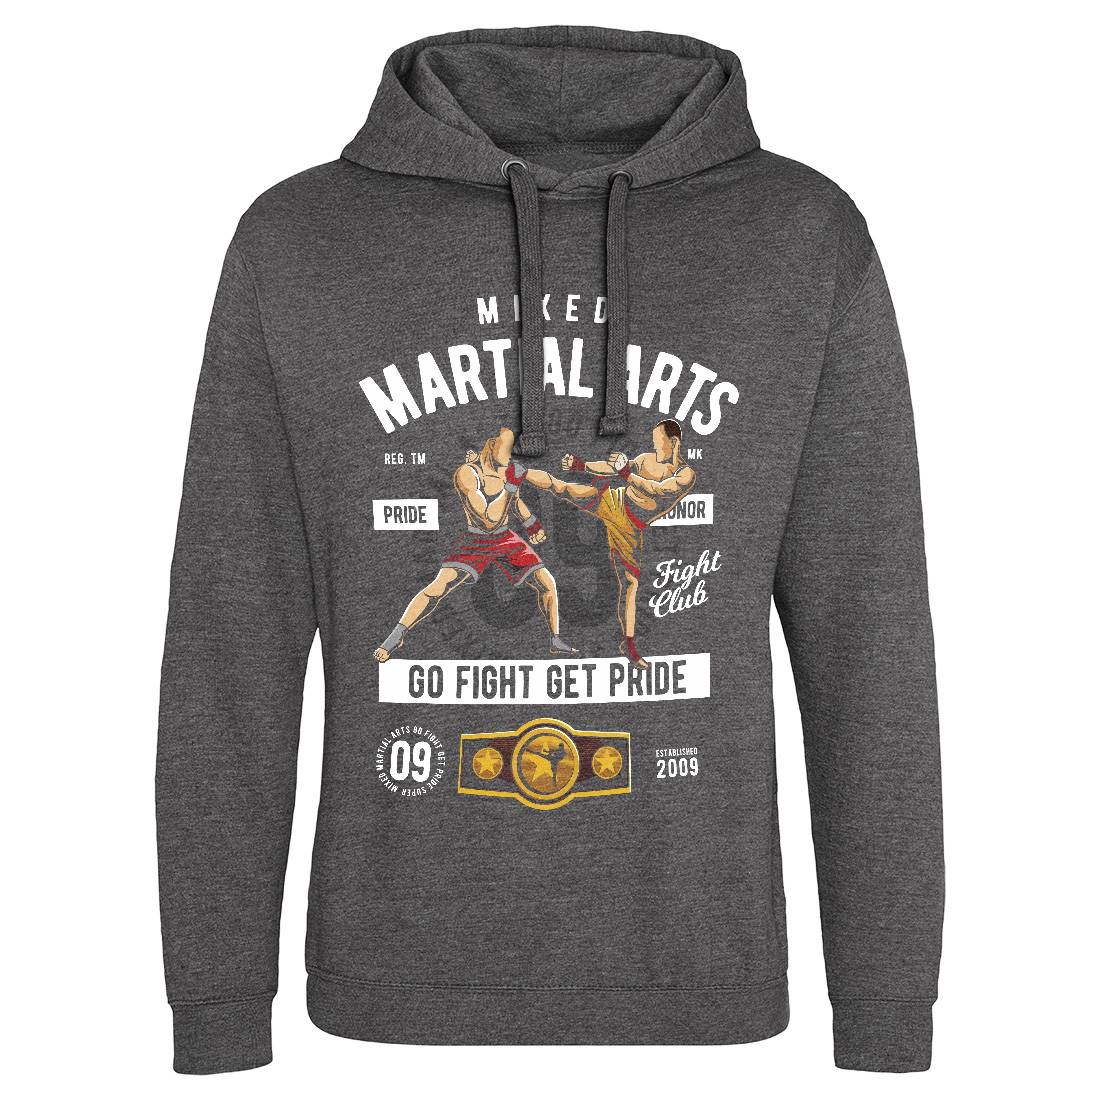 Mixed Martial Arts Mens Hoodie Without Pocket Sport C396